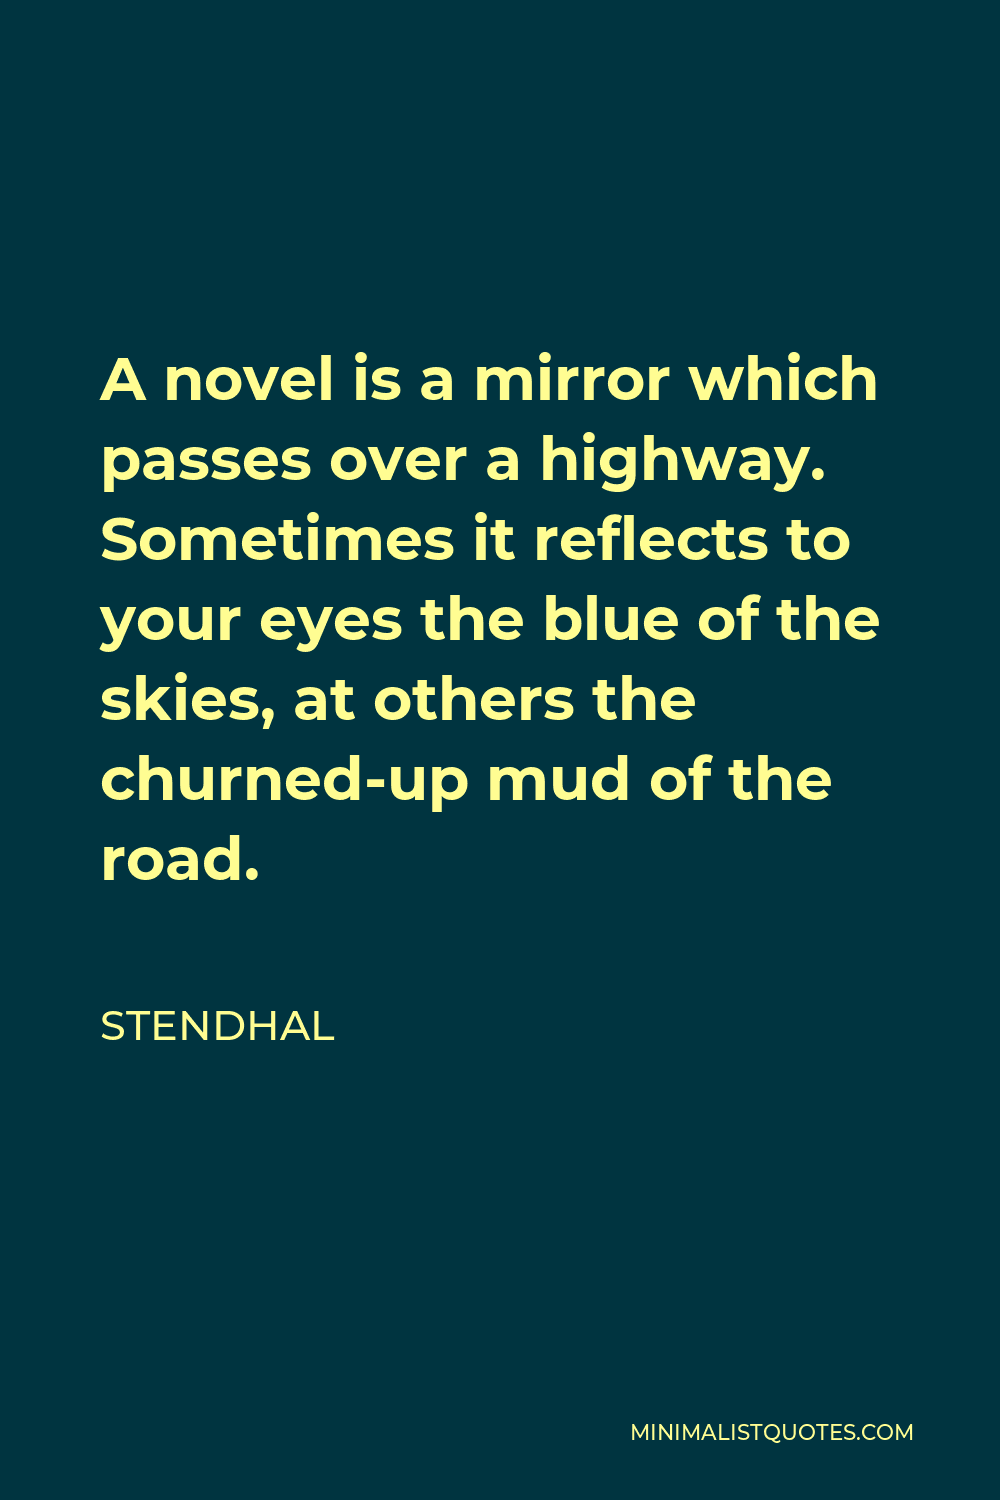 Stendhal Quote - A novel is a mirror which passes over a highway. Sometimes it reflects to your eyes the blue of the skies, at others the churned-up mud of the road.